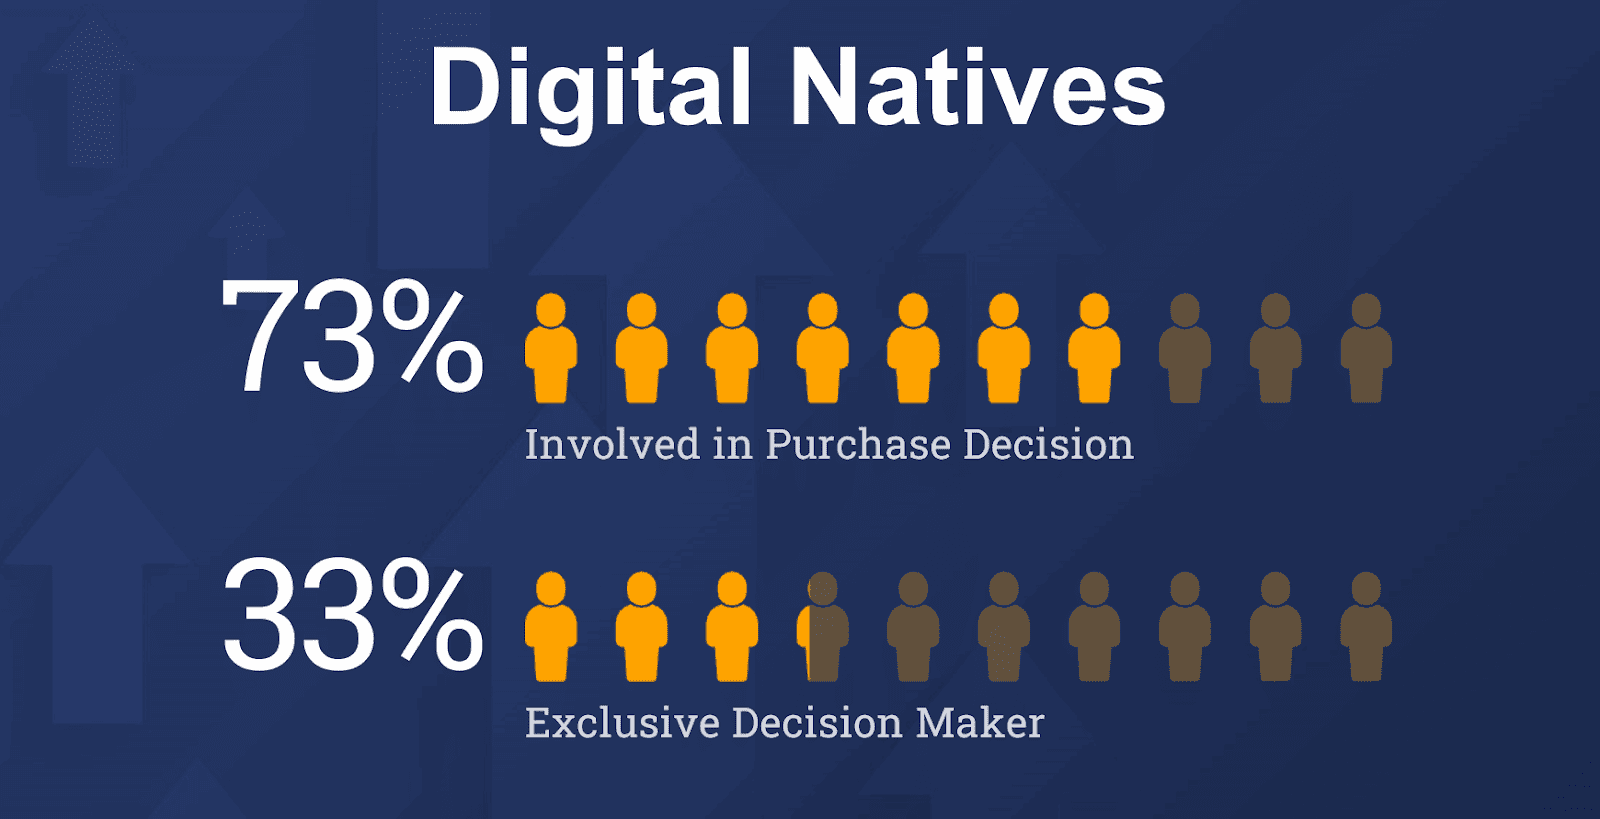 Digital Natives | 73% Involved in Purchase Decision, 33% Exclusive Decision Maker